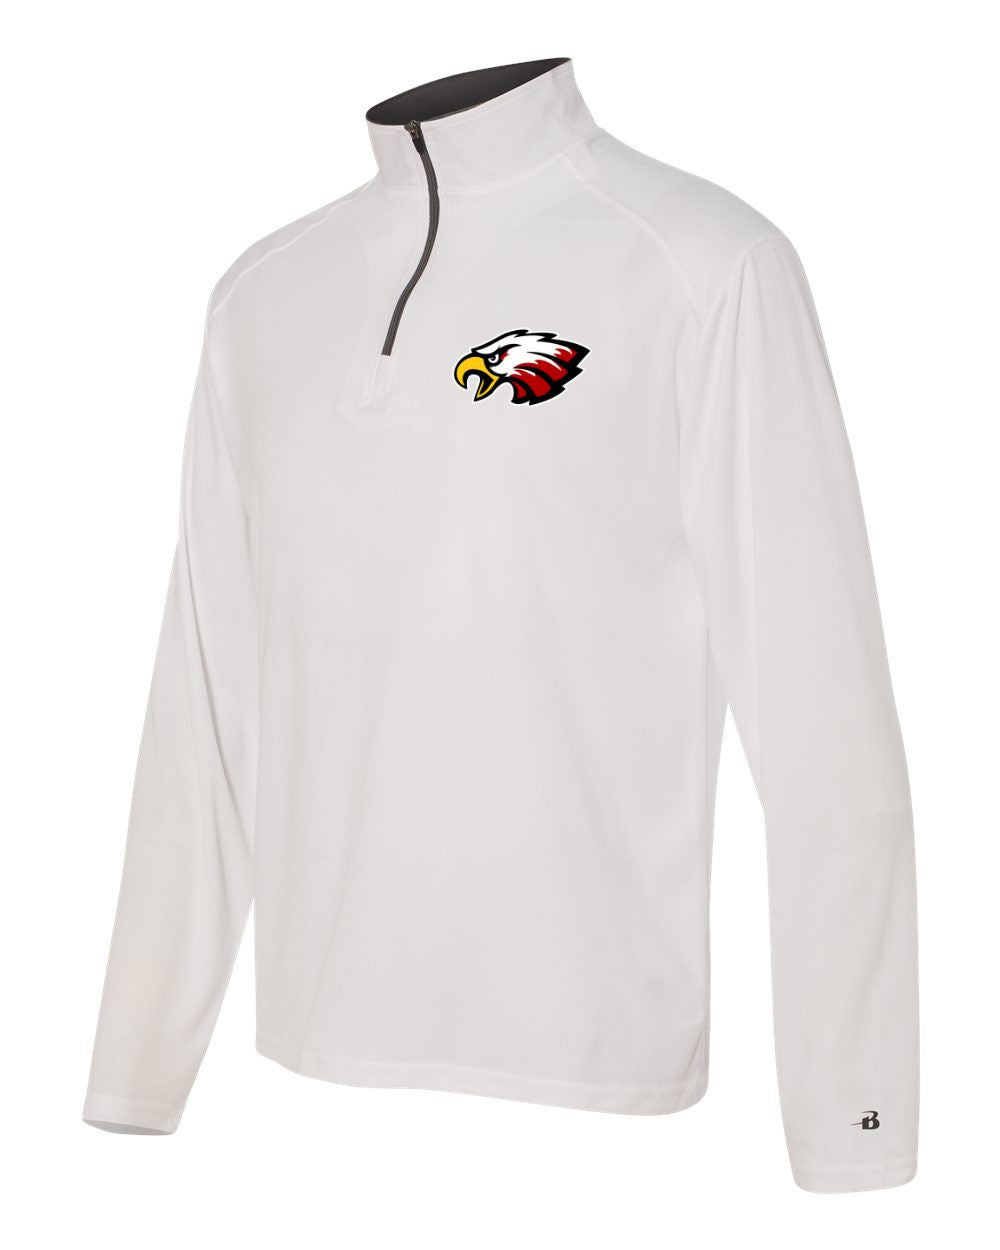 Southern Boone Basketball B-Core Quarter-Zip Pullover - 4102